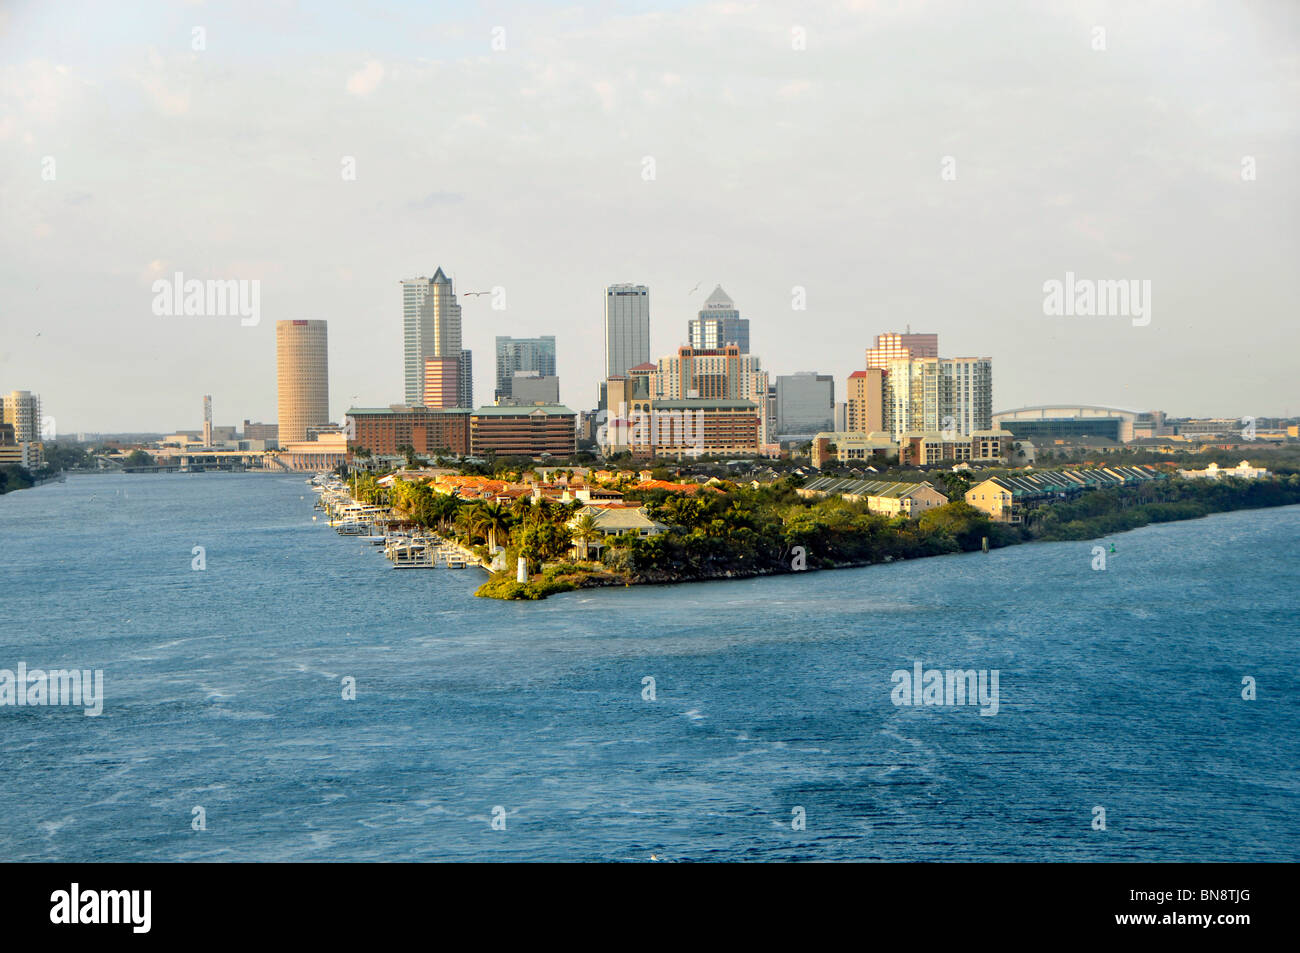 Downtown Tampa Florida Skyline with Residential Homes Stock Photo